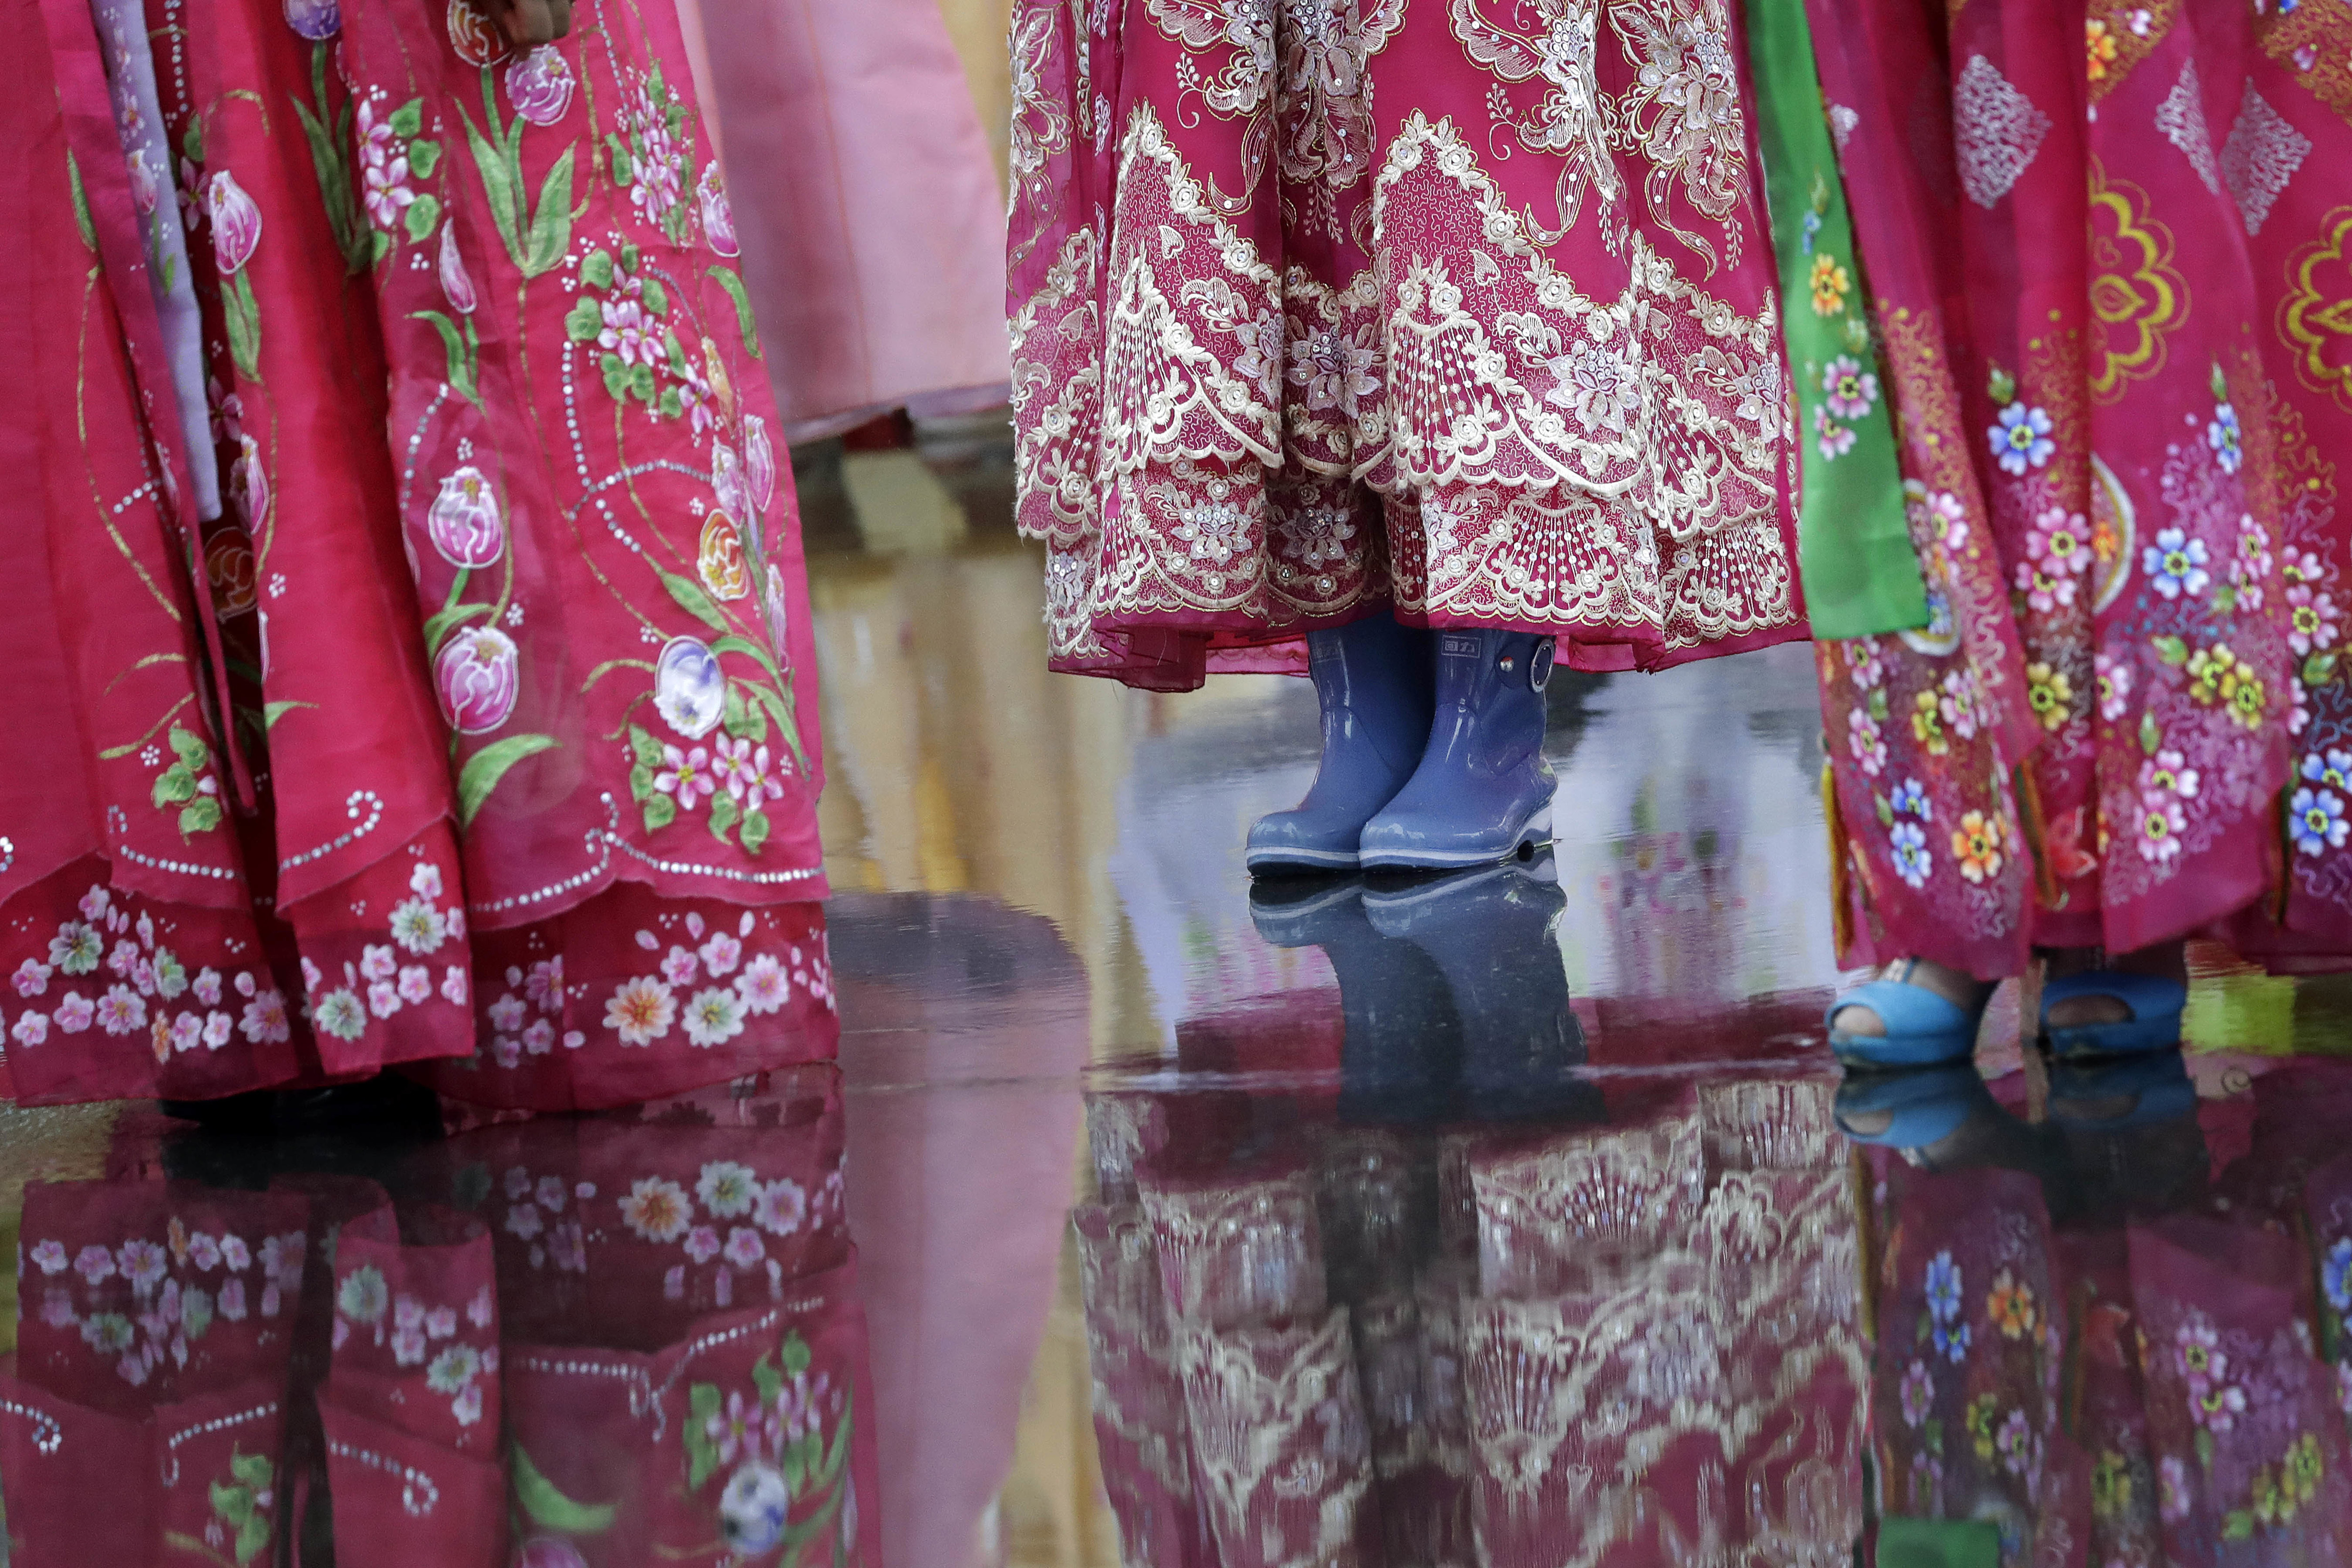 A university student wears a pair of rain boots with her traditional Korean dress as she waits in the rain for the start of a mass dance on Thursday, July 27, 2017, in Pyongyang, North Korea as part of celebrations for the 64th anniversary of the armistice that ended the Korean War. (AP Photo/Wong Maye-E)